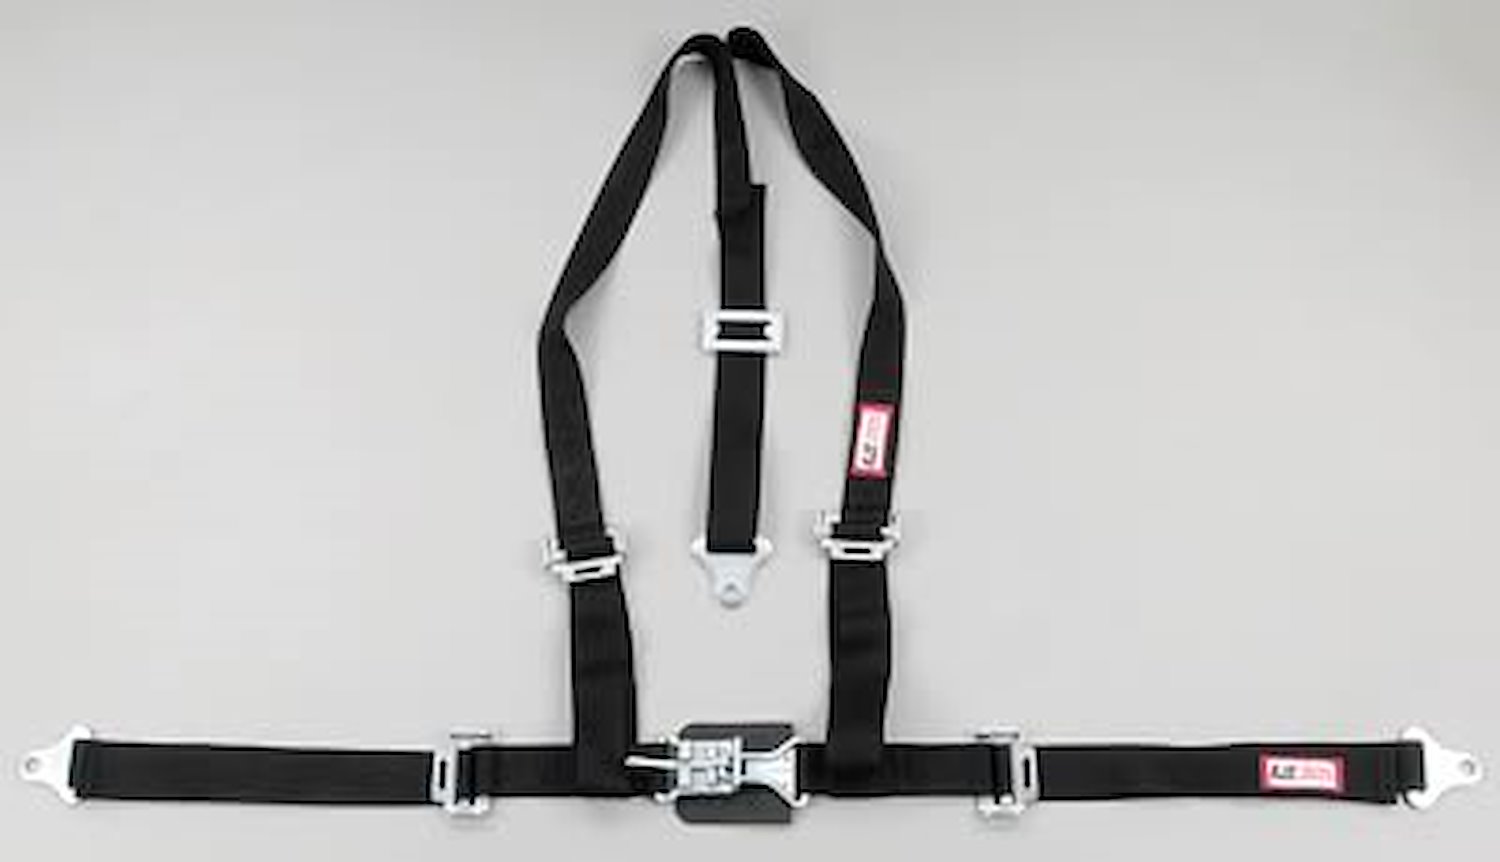 NON-SFI L&L HARNESS 3 PULL UP Lap Belt SNAP SEWN IN 2 S.H. Individual FLOOR Mount WRAP/SNAP RED